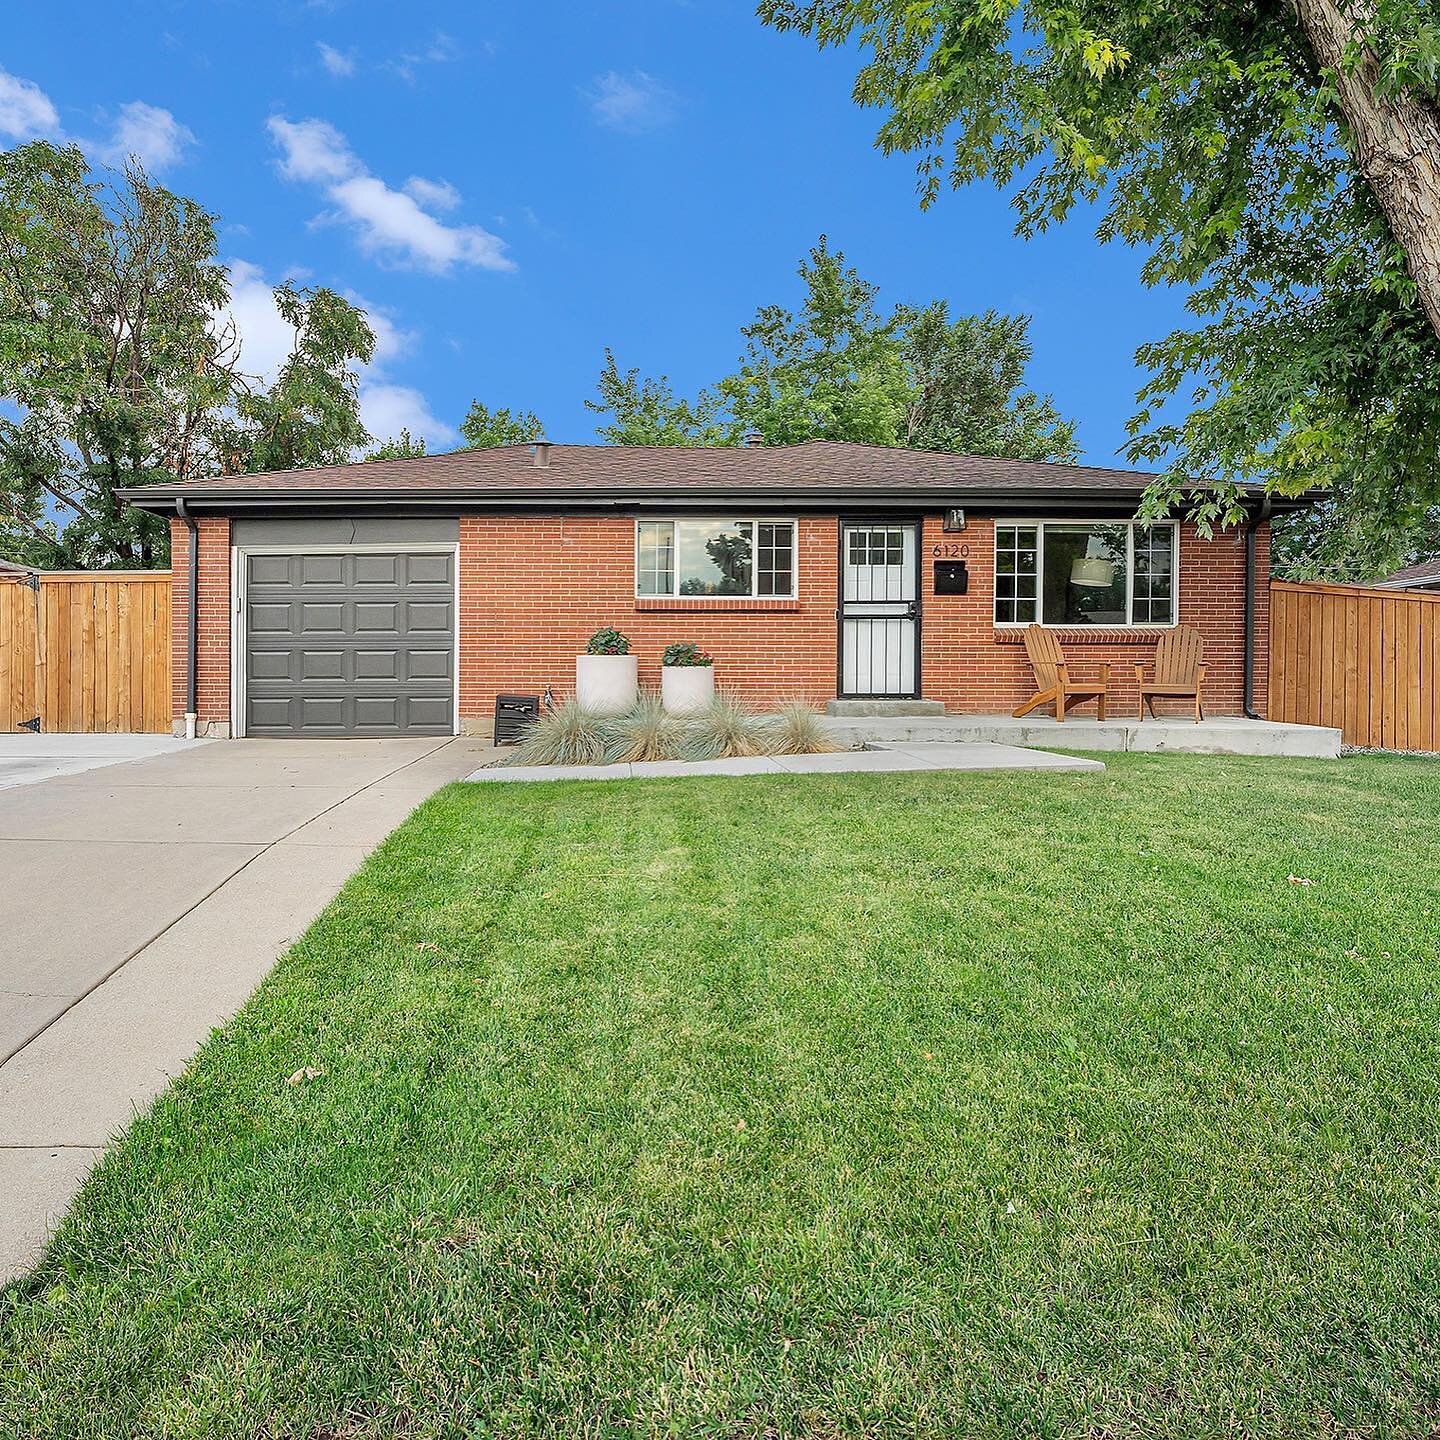 Just Listed: Bright Open Concept Home in Alta Vista!

Alta Vista is one of Arvada's most central and sought after neighborhoods. Nestled along the Ralston Cove Park &amp; Trail, minutes from Old Town Arvada, this sturdy brick ranch is situated on a q